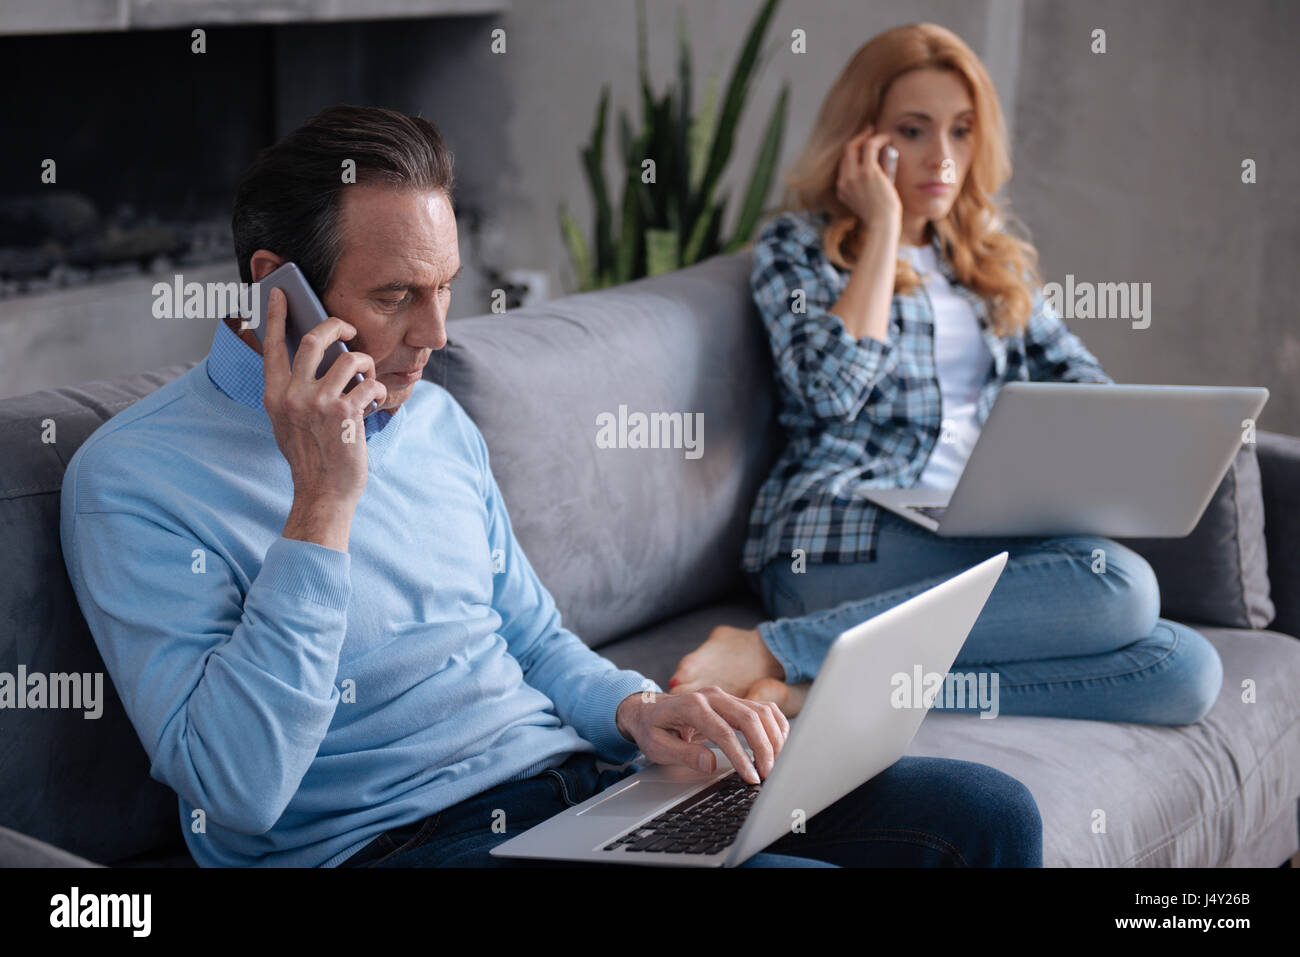 Concentrated mature couple using gadgets at home Stock Photo